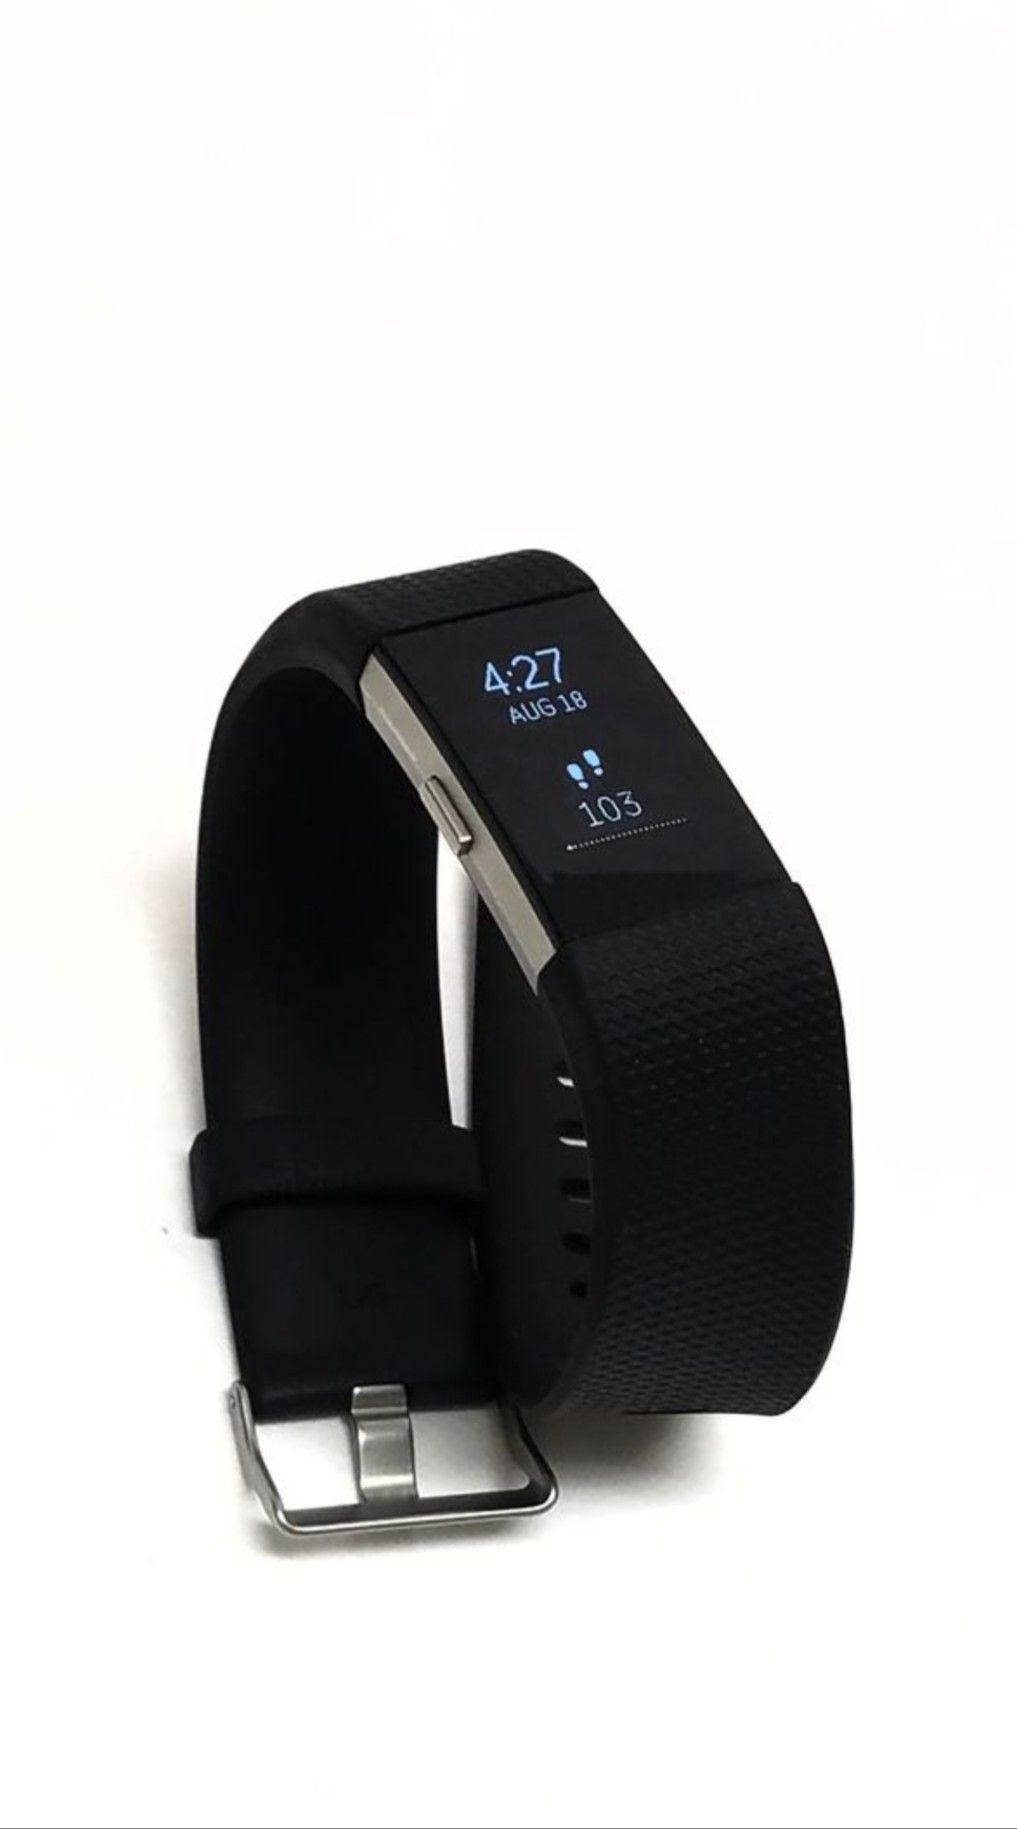 Fitbit Charge 2 - Activity Tracker with Heart Rate Monitor